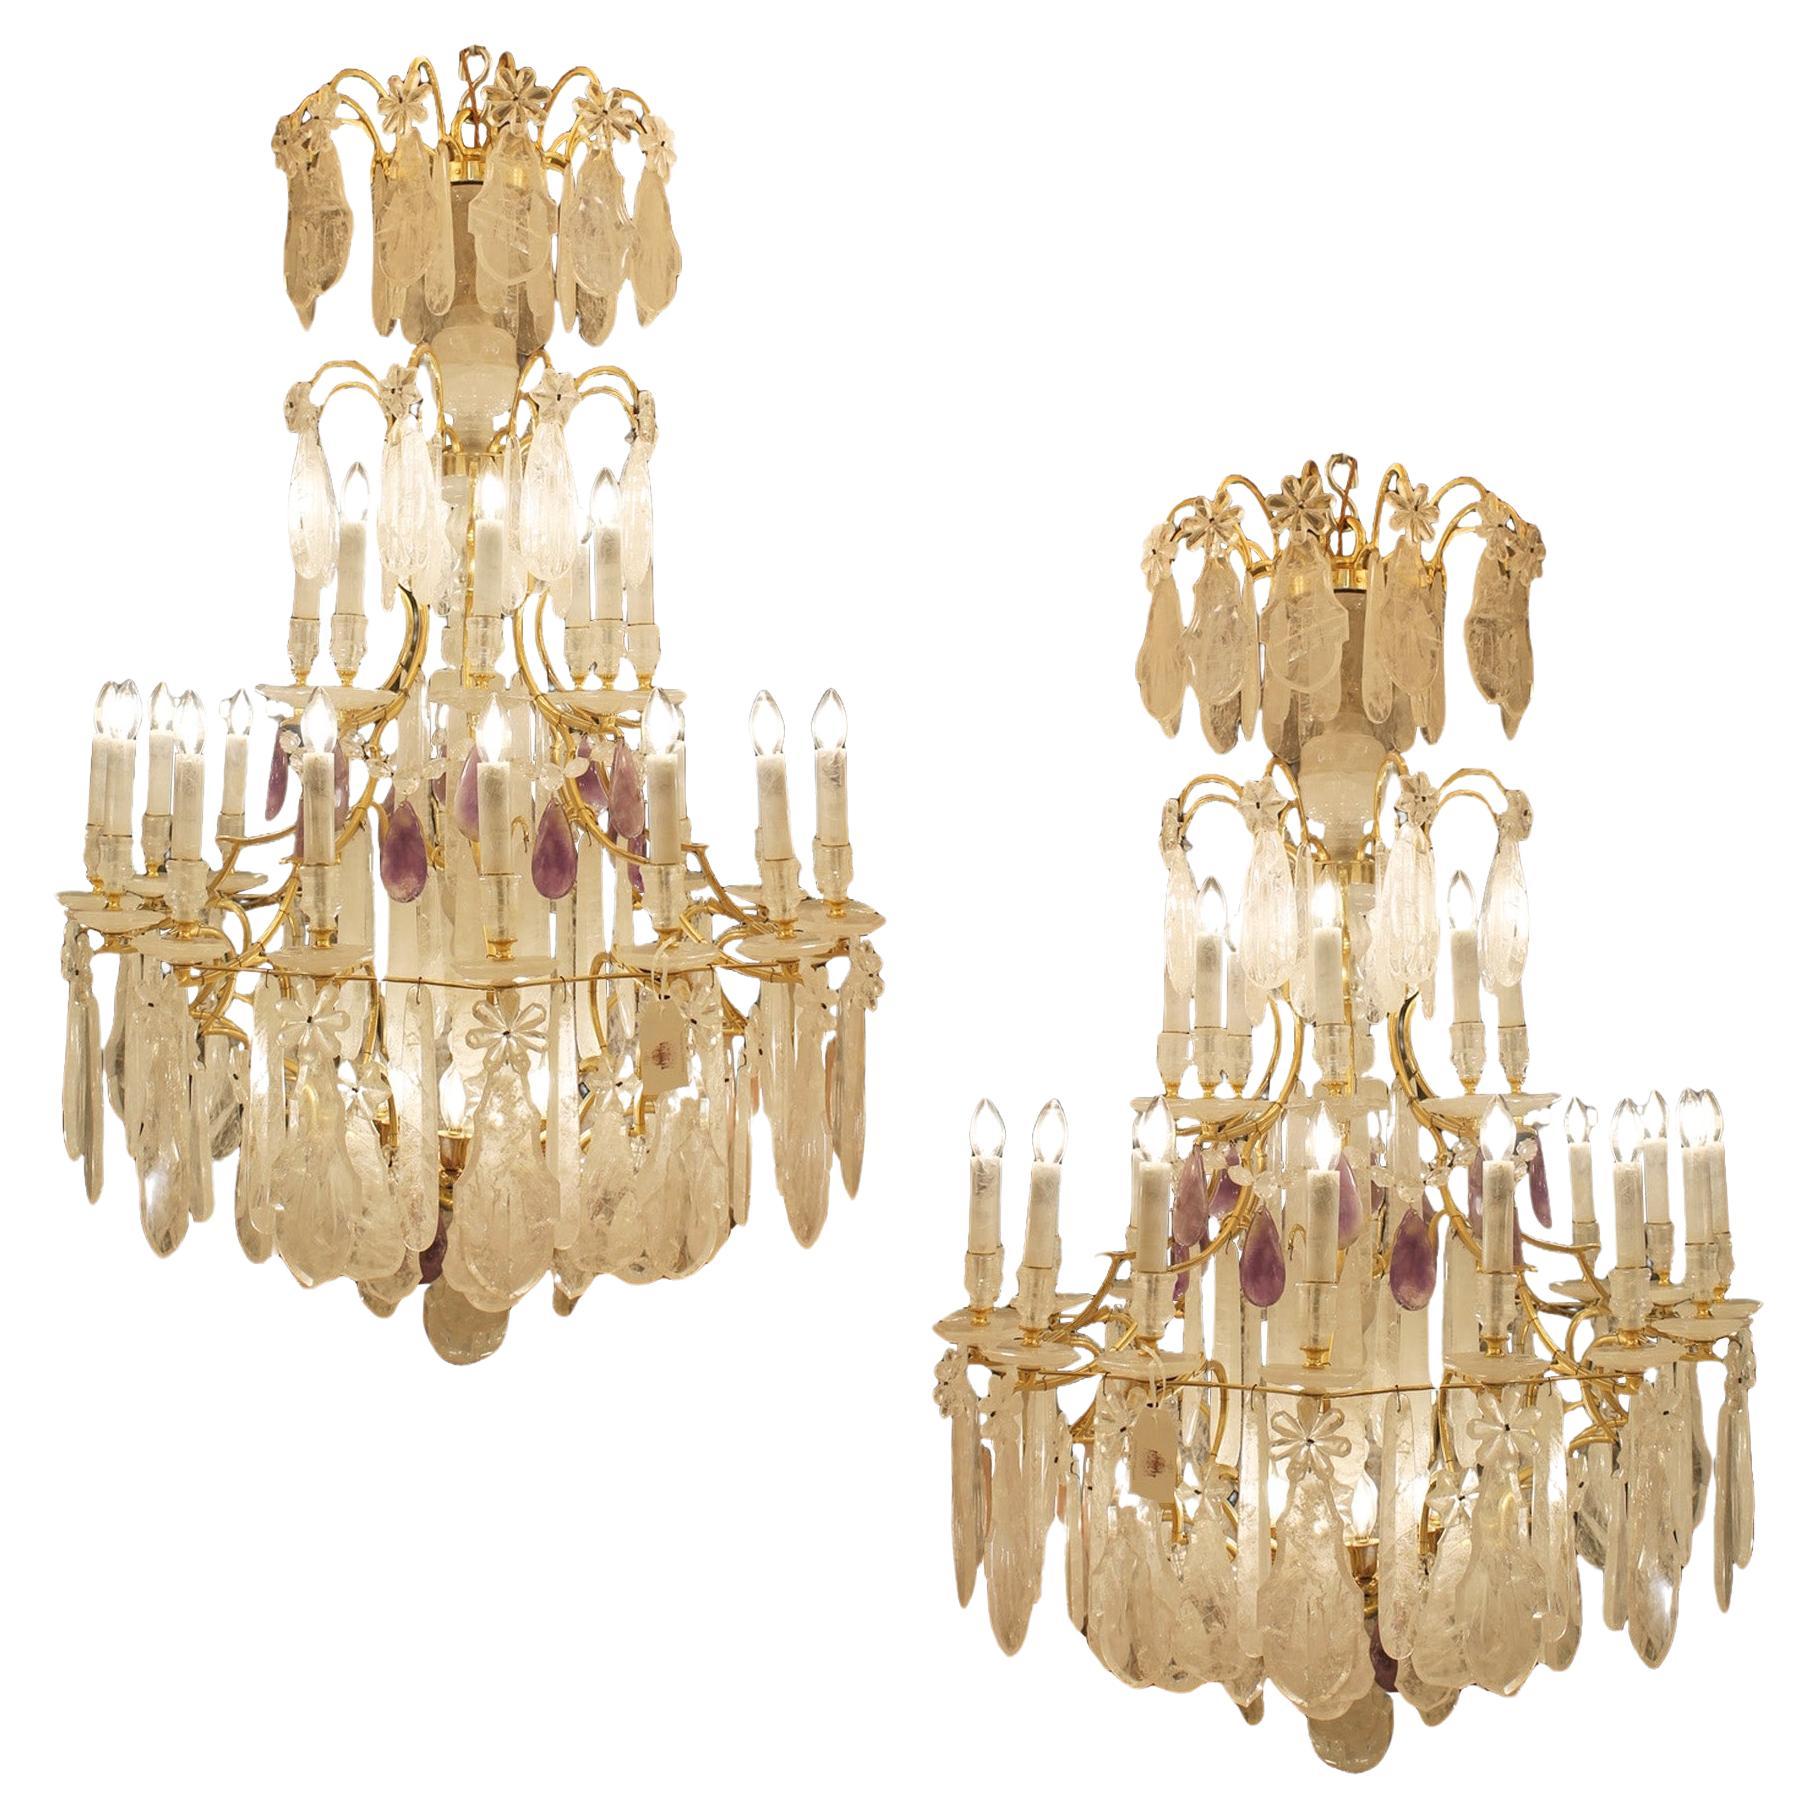 Exquisite pair of French Rock Crystal and Amethyst Chandeliers